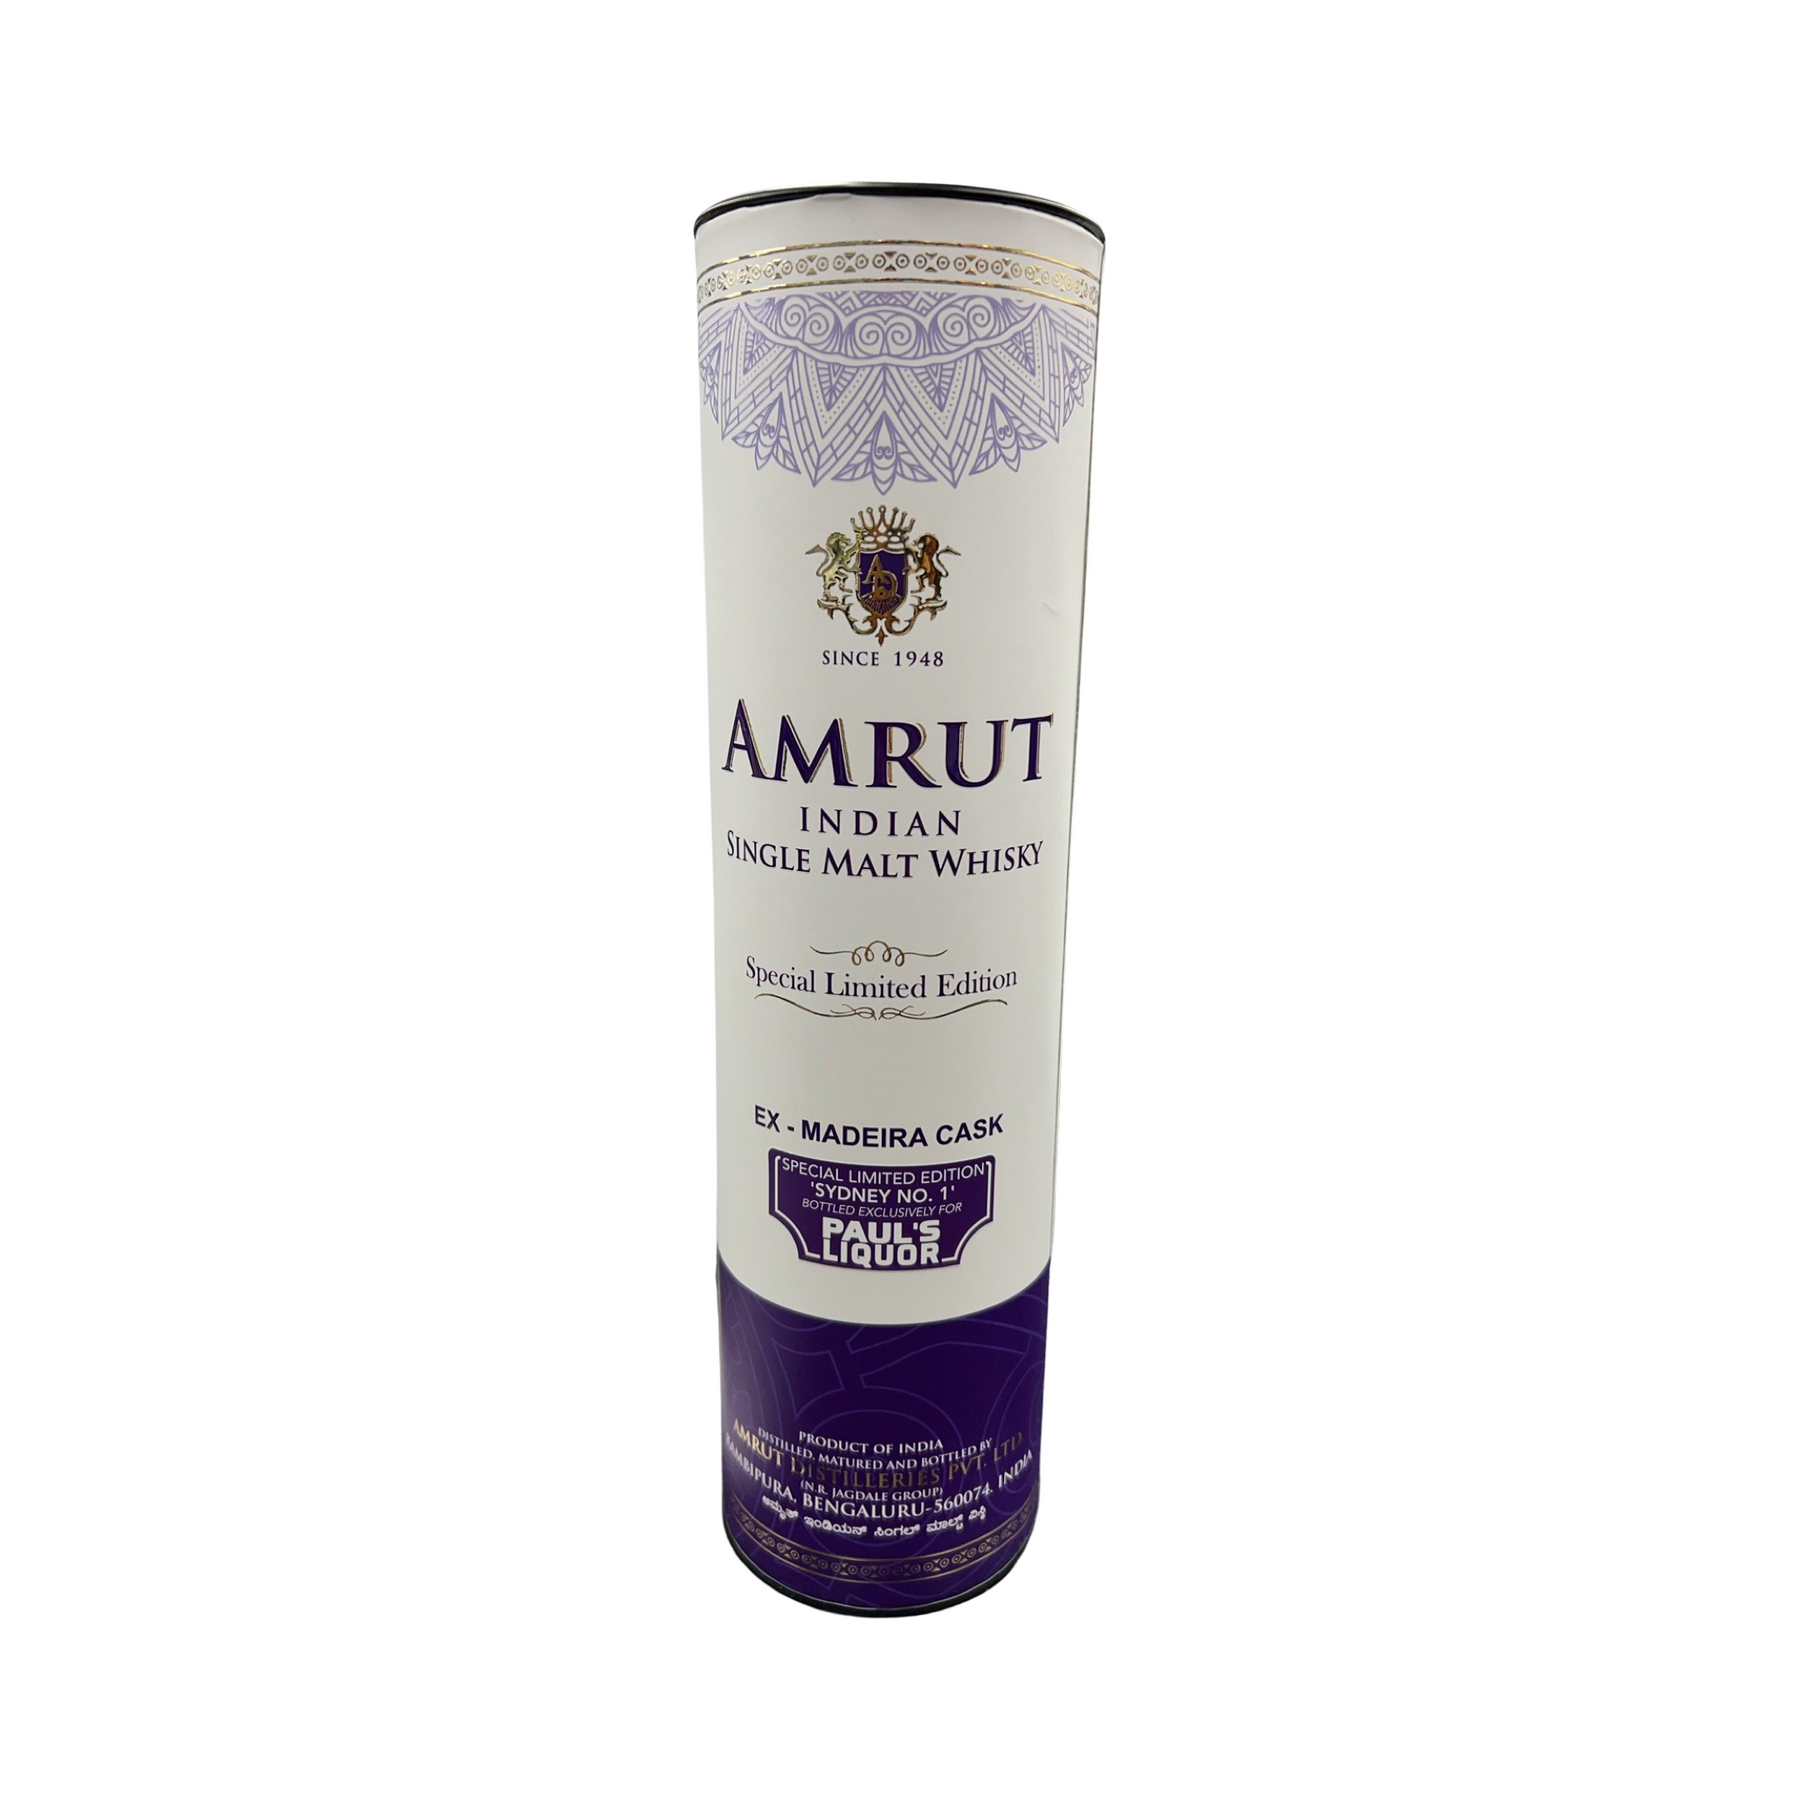 Amrut 5 Year Old Sydney Edition Cask #8834 Limited Edition Whisky 700ml